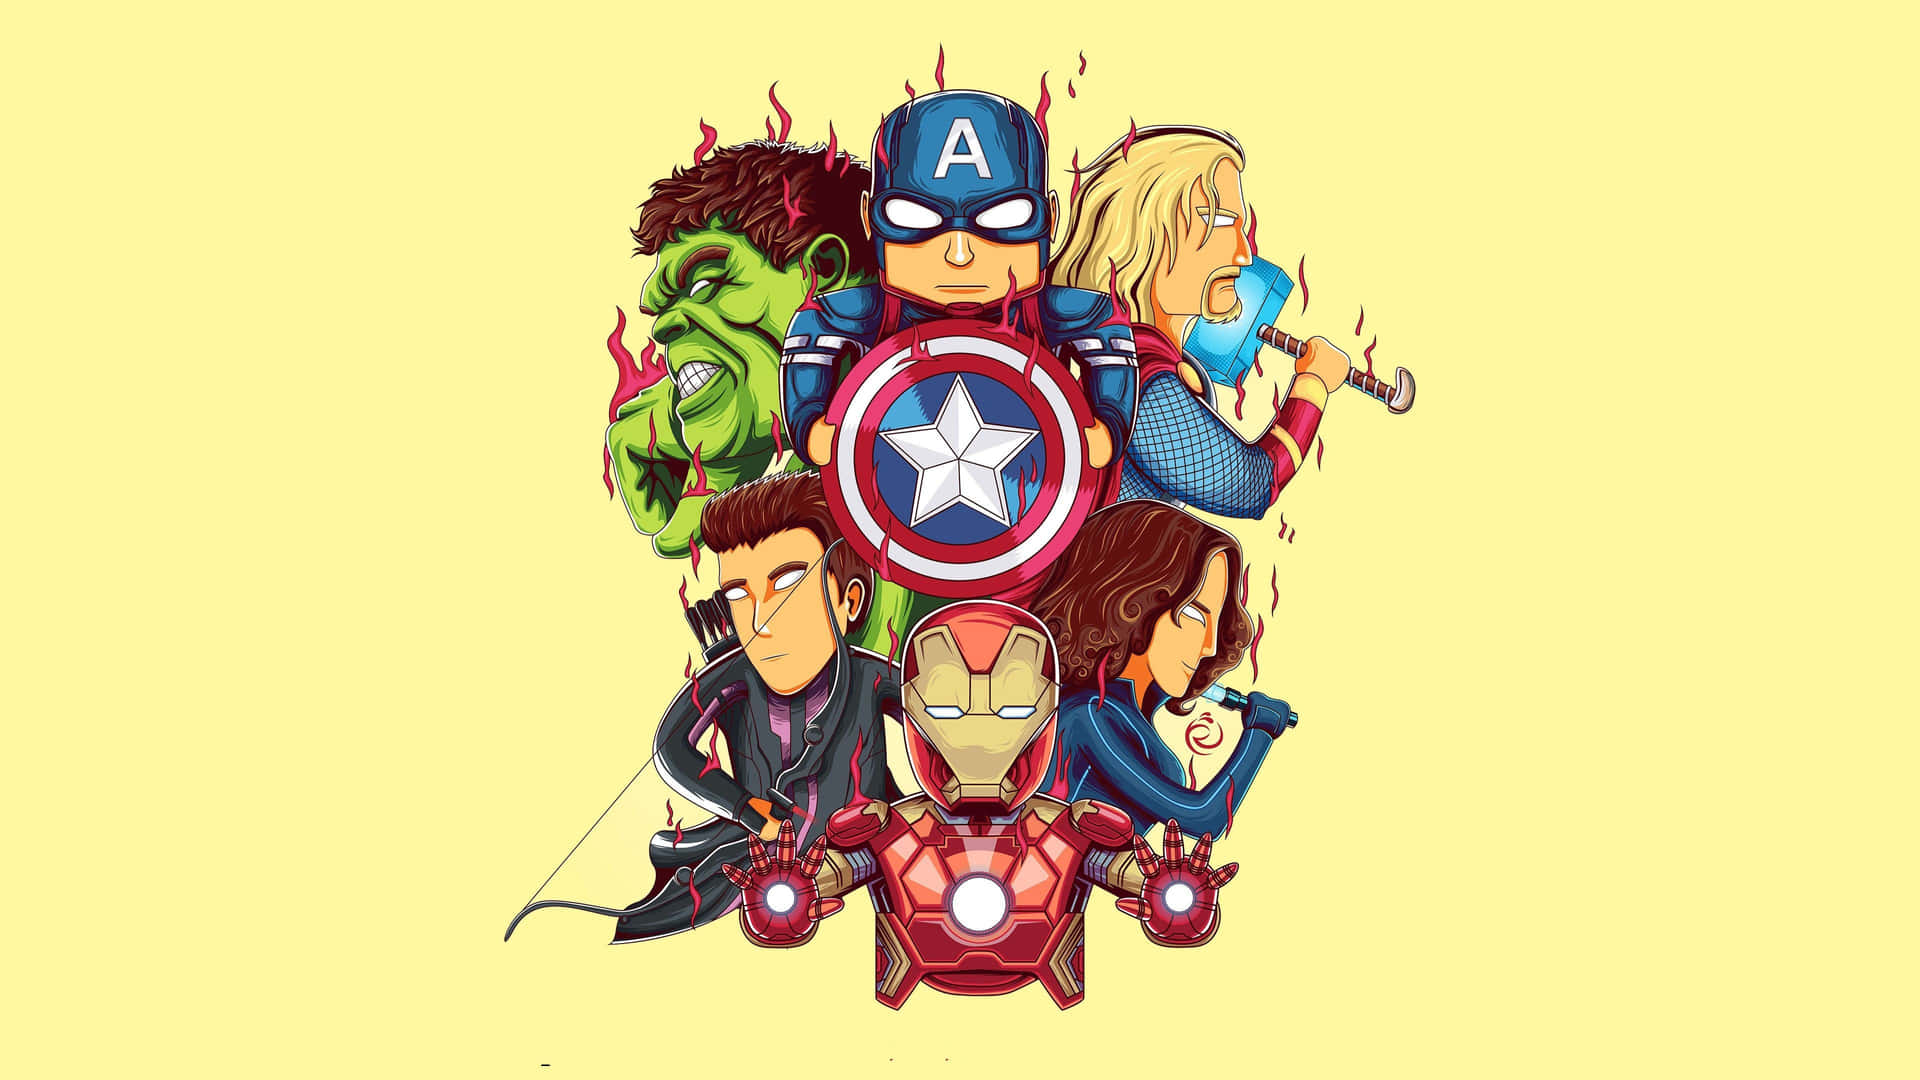 "Assemble the Mightiest Heroes!" Wallpaper